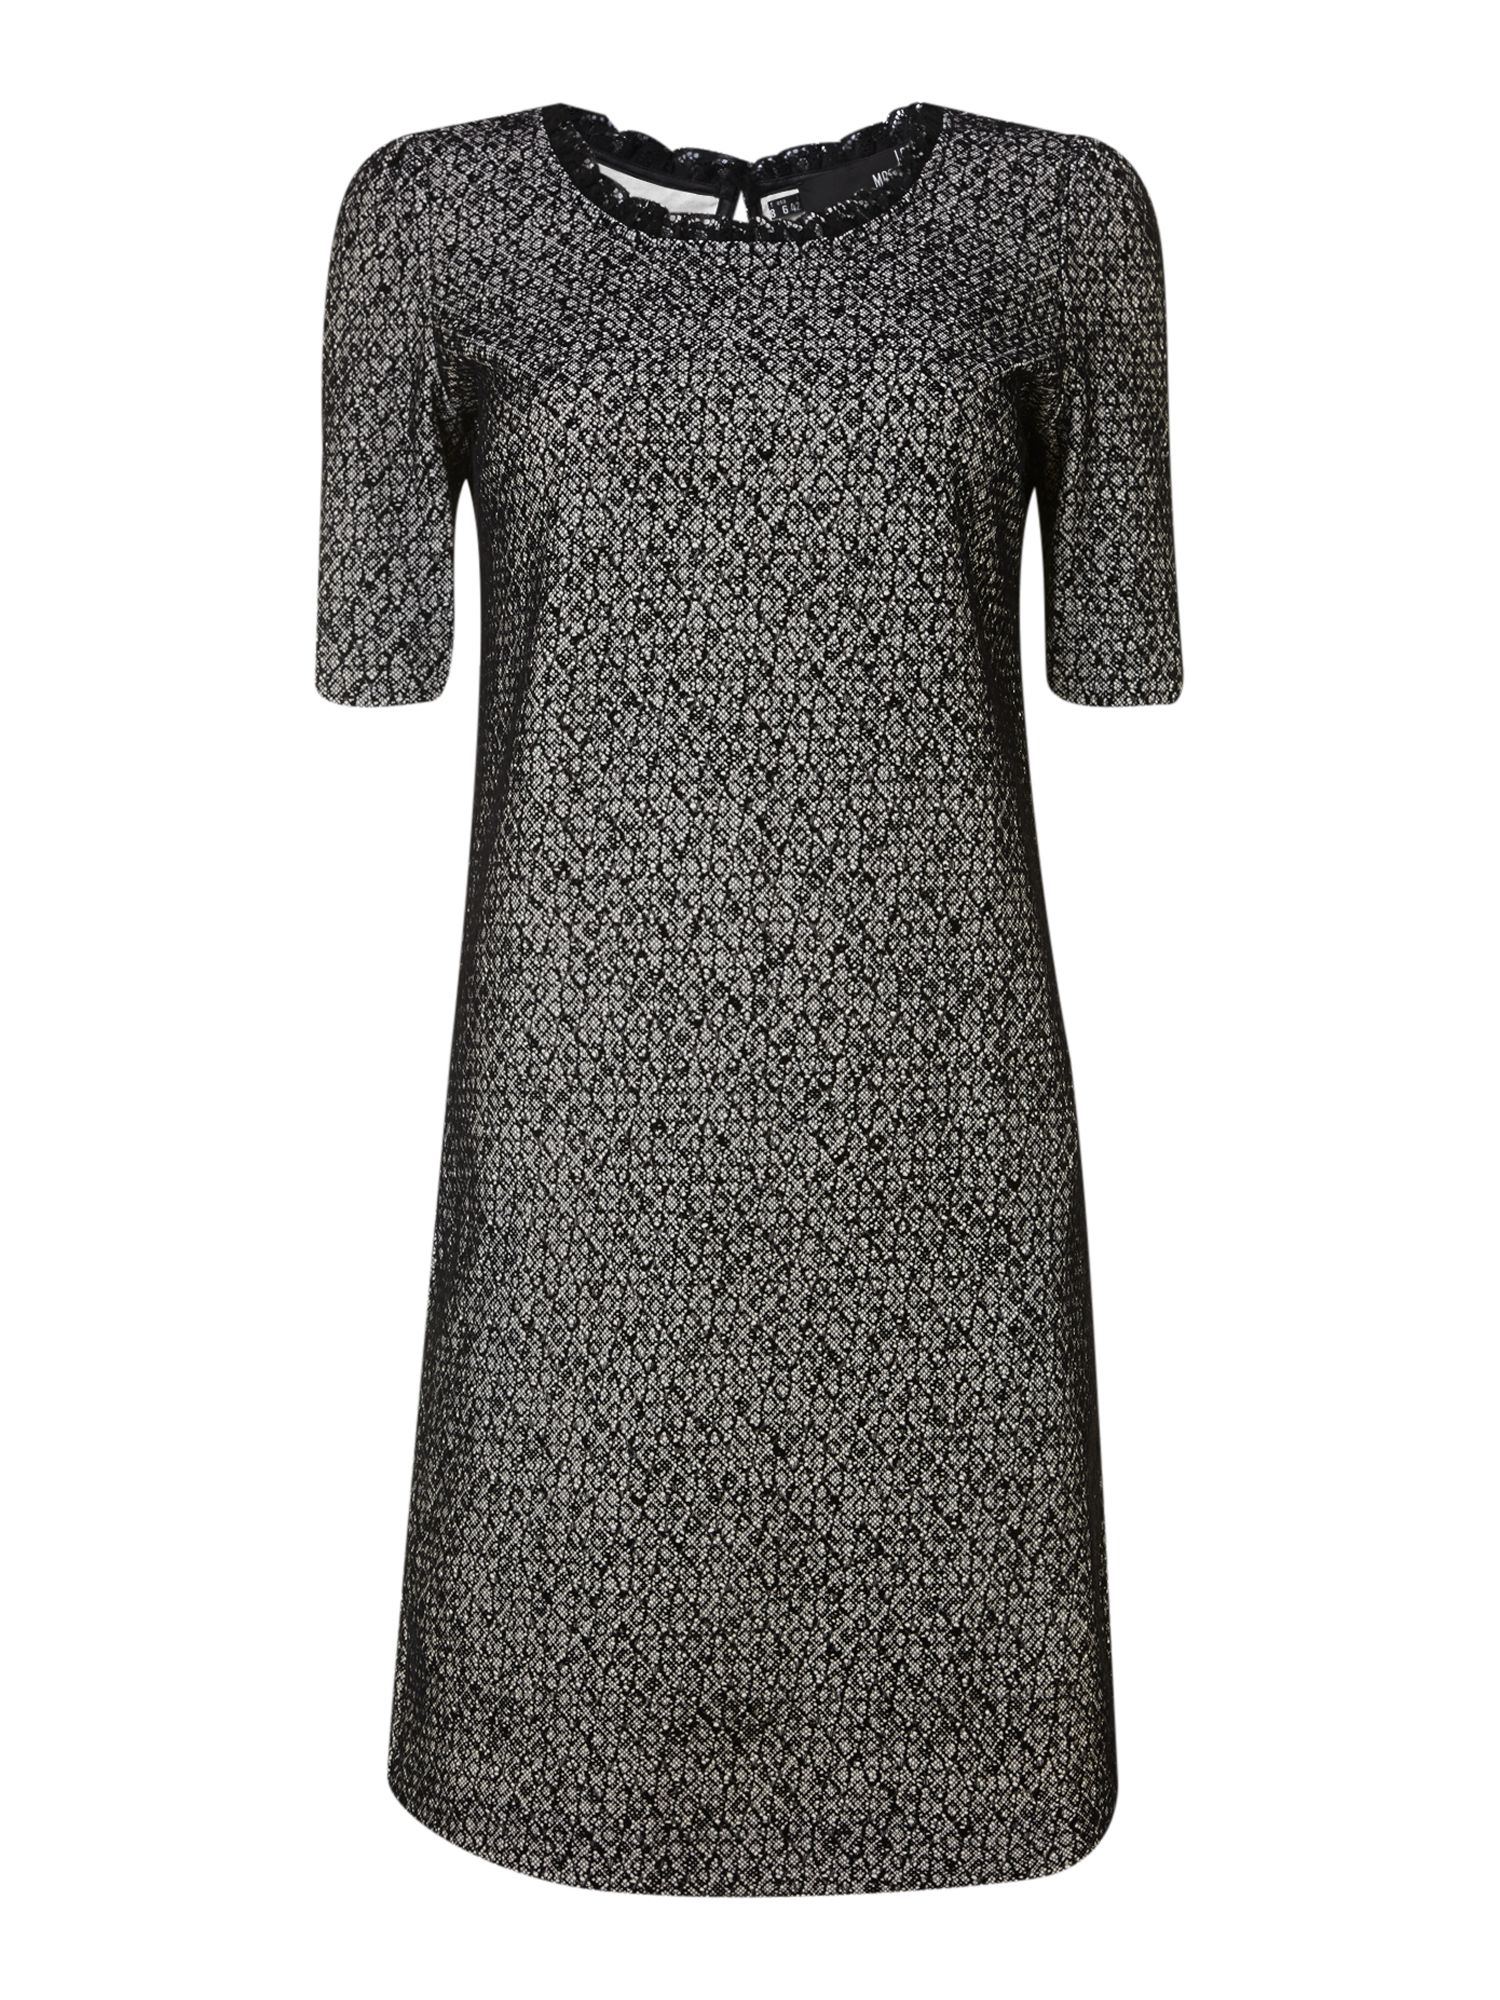 Love Moschino Short Sleeve Textured Dress with Lace Neck in Black ...